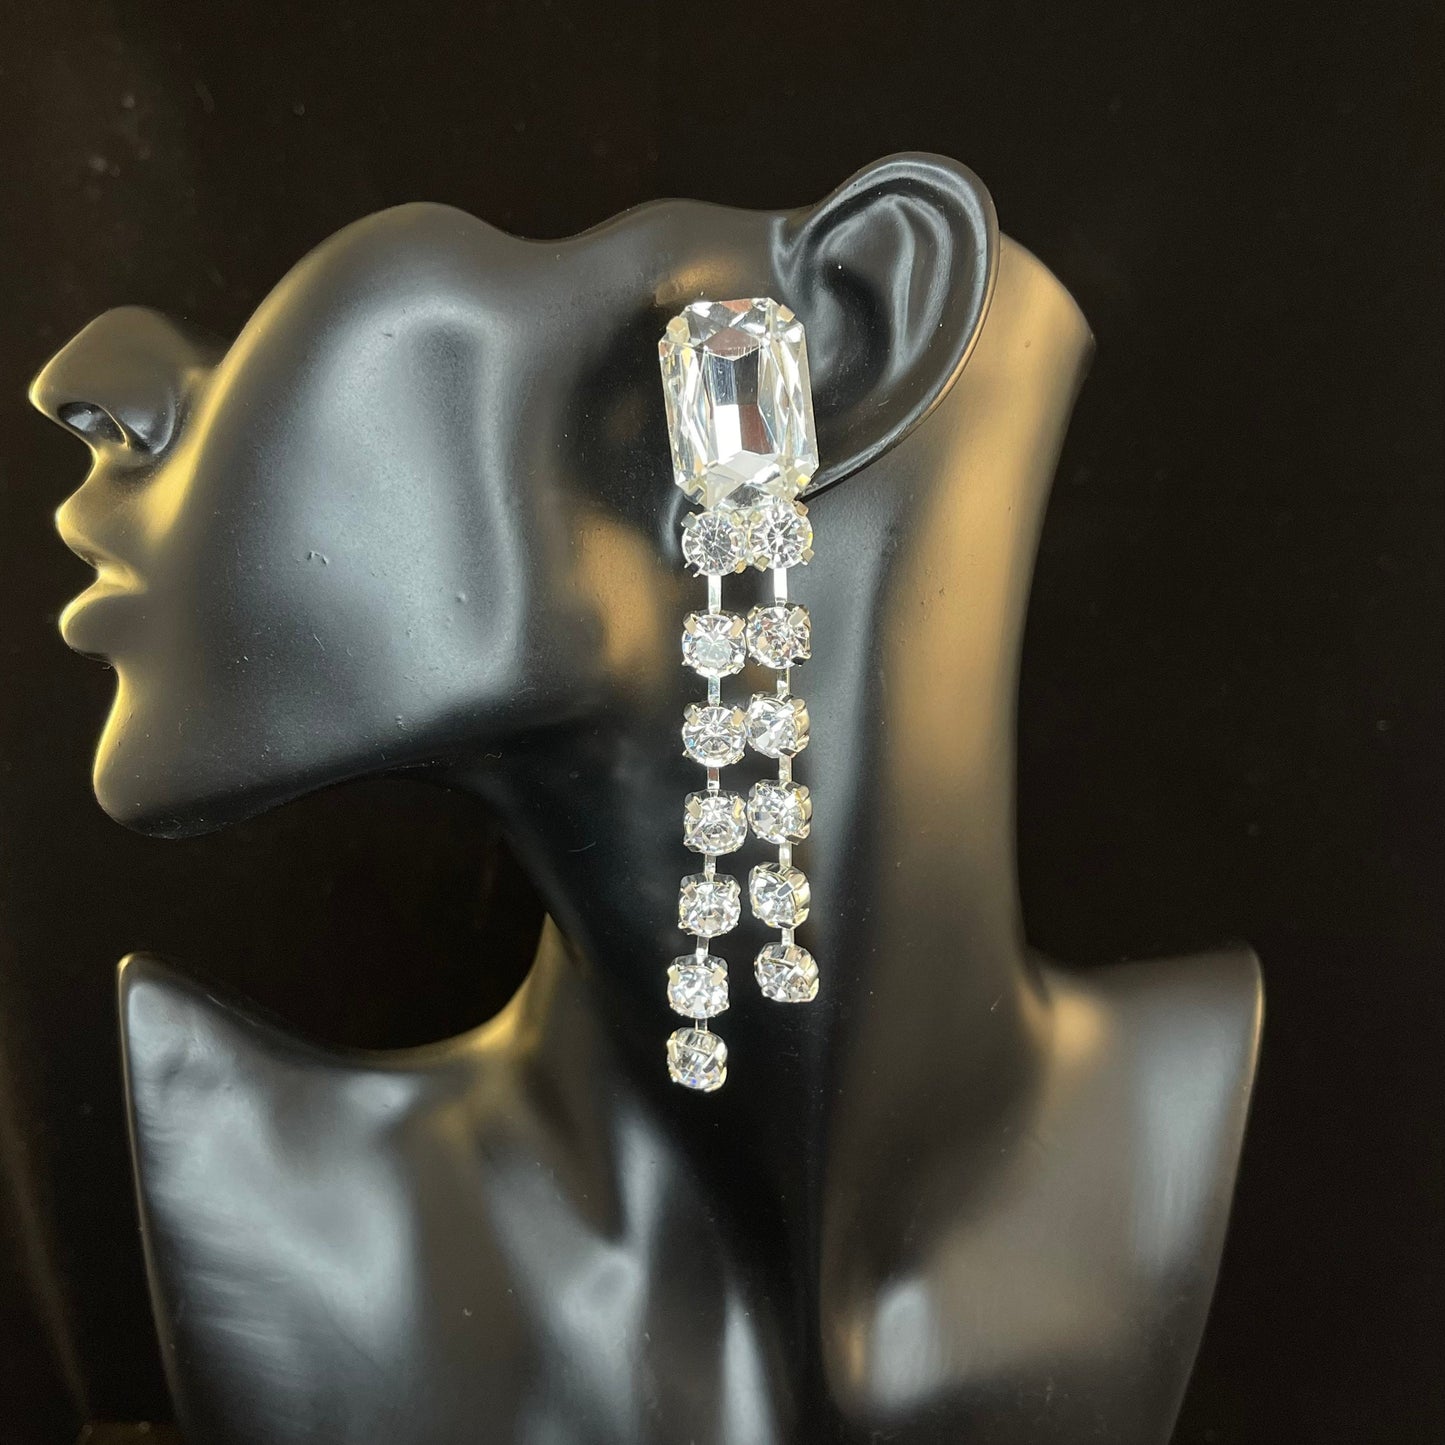 Crystal Drop Earrings / Long Sparkling Clip on or Pierced / Gift / Drag Queen Jewelry / Costume Jewellery